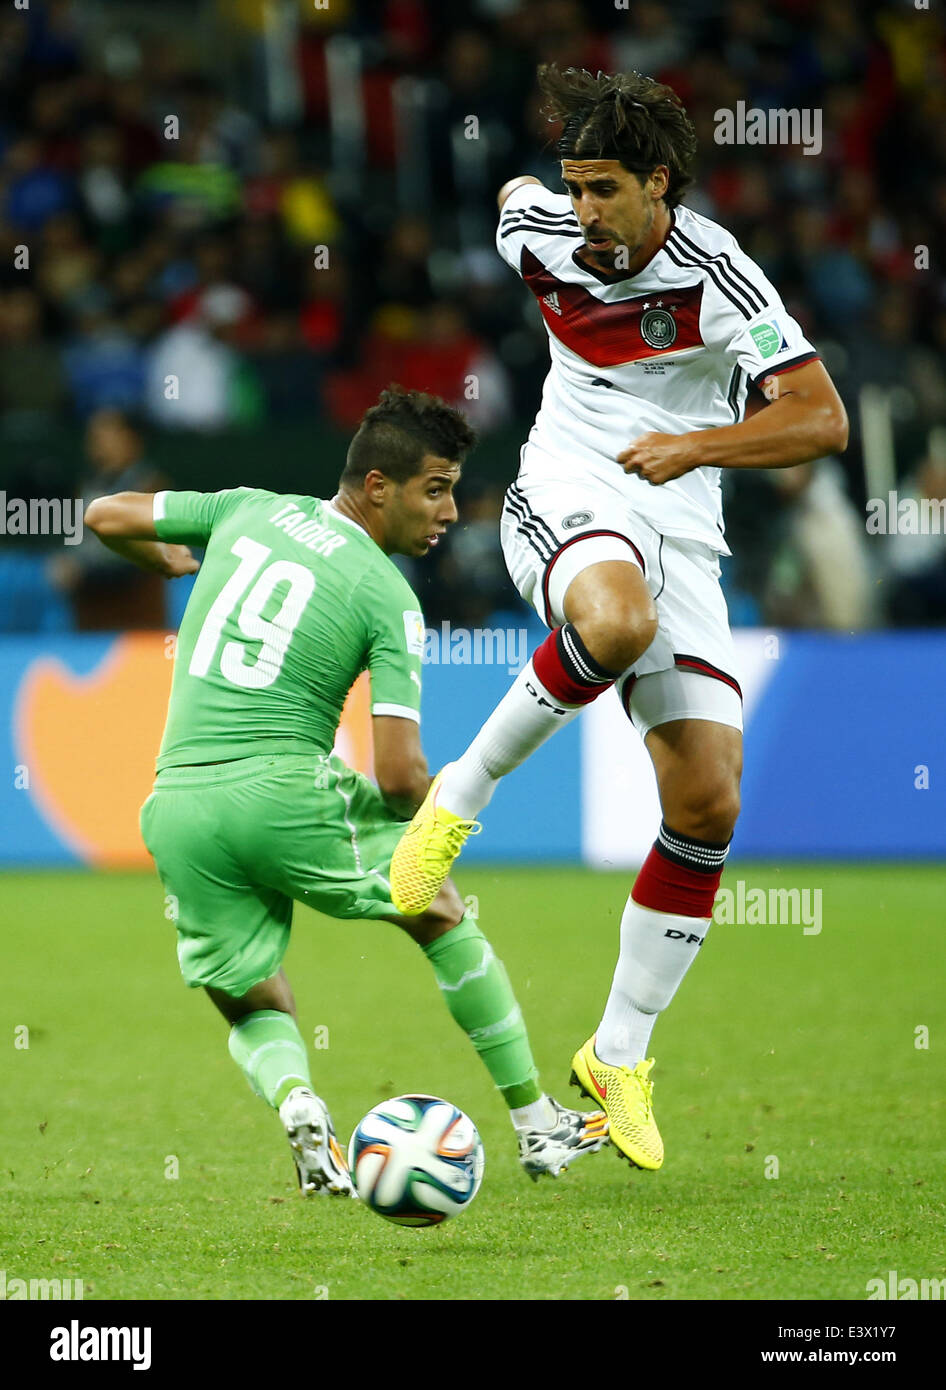 Porto Alegre, Brazil. 30th June, 2014. Germany's Sami Khedira vies with Algeria's Saphir Taider during a Round of 16 match between Germany and Algeria of 2014 FIFA World Cup at the Estadio Beira-Rio Stadium in Porto Alegre, Brazil, on June 30, 2014. Credit:  Chen Jianli/Xinhua/Alamy Live News Stock Photo